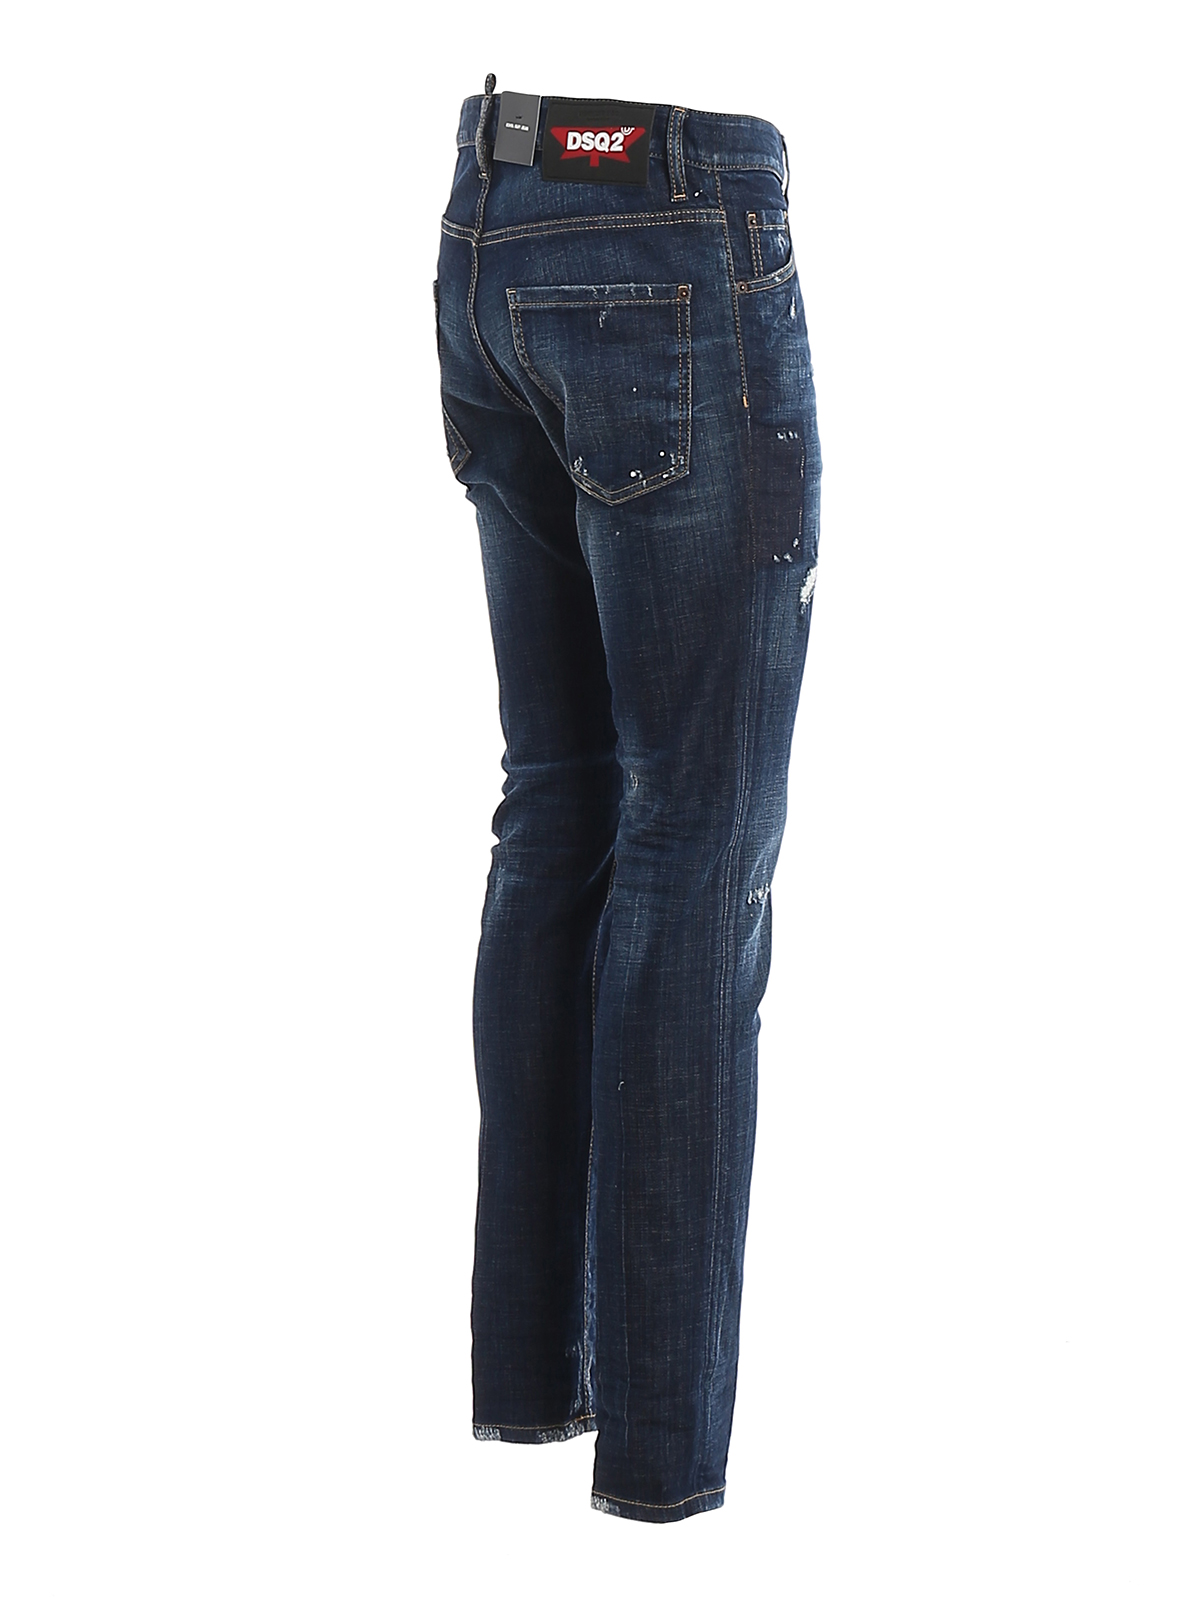 Straight leg jeans Dsquared2 - Cool Guy jeans - S74LB0712S30342470